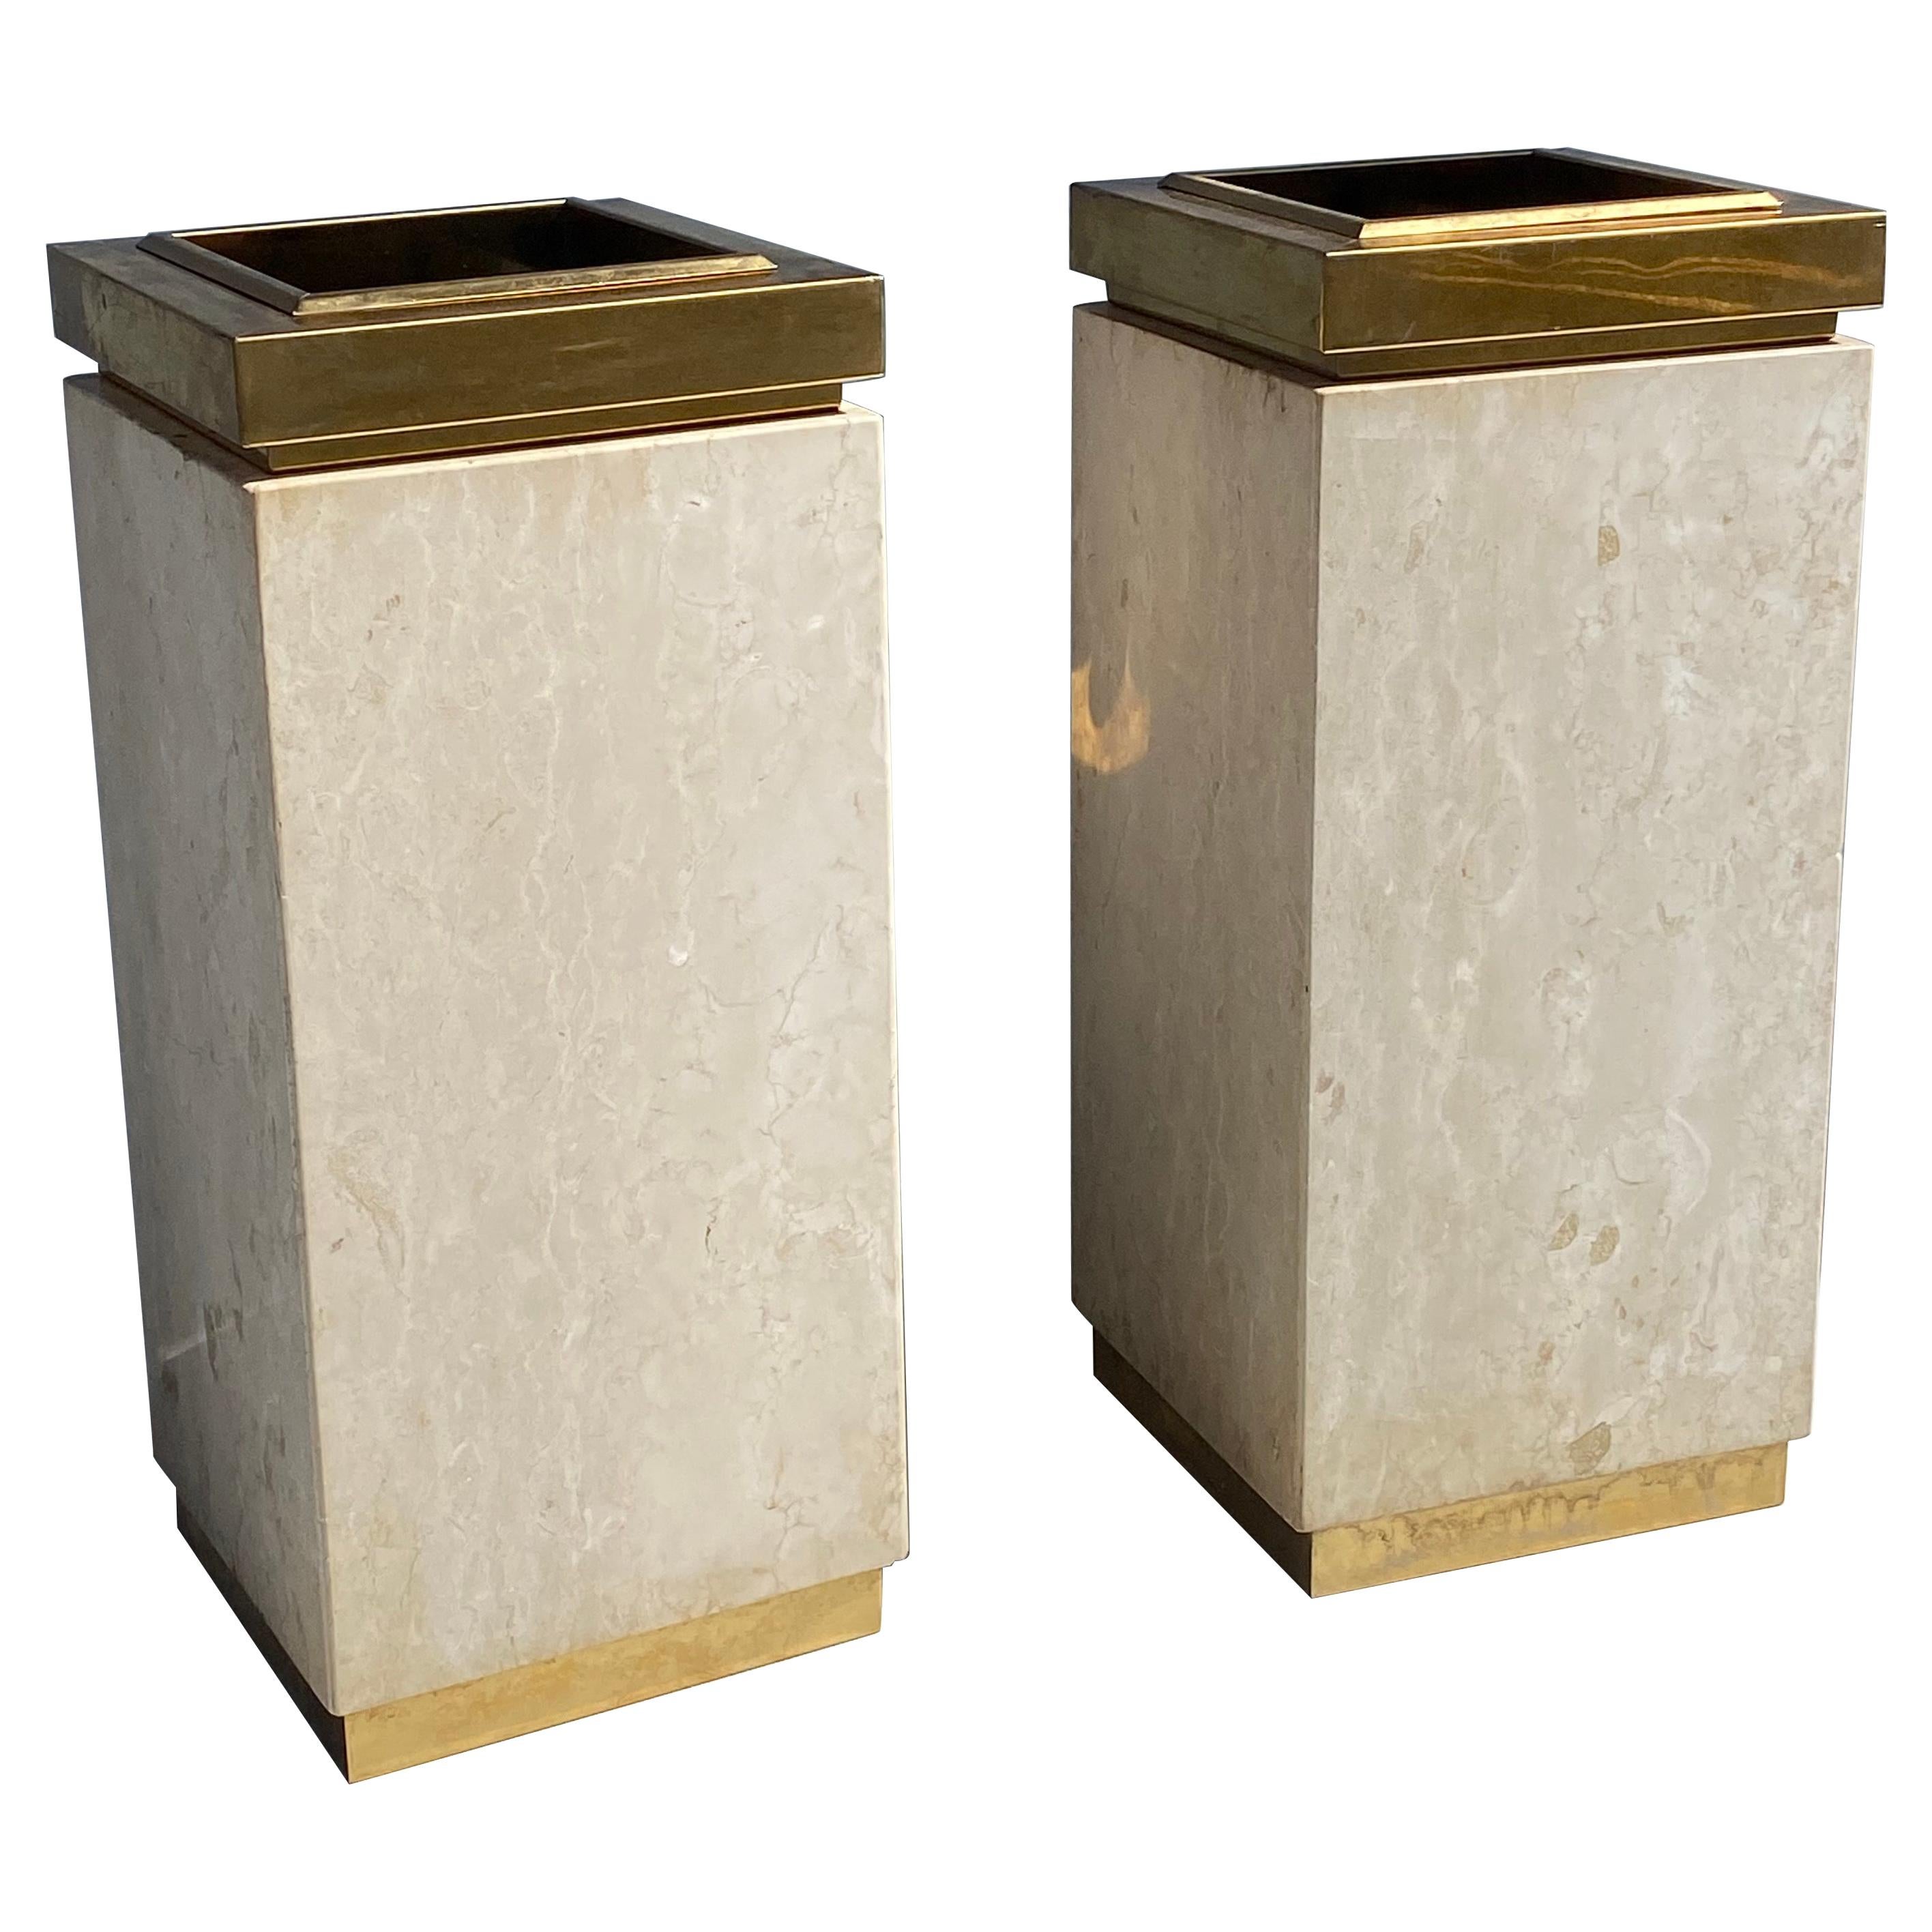 Travertine and Brass Trash Cans / Planters